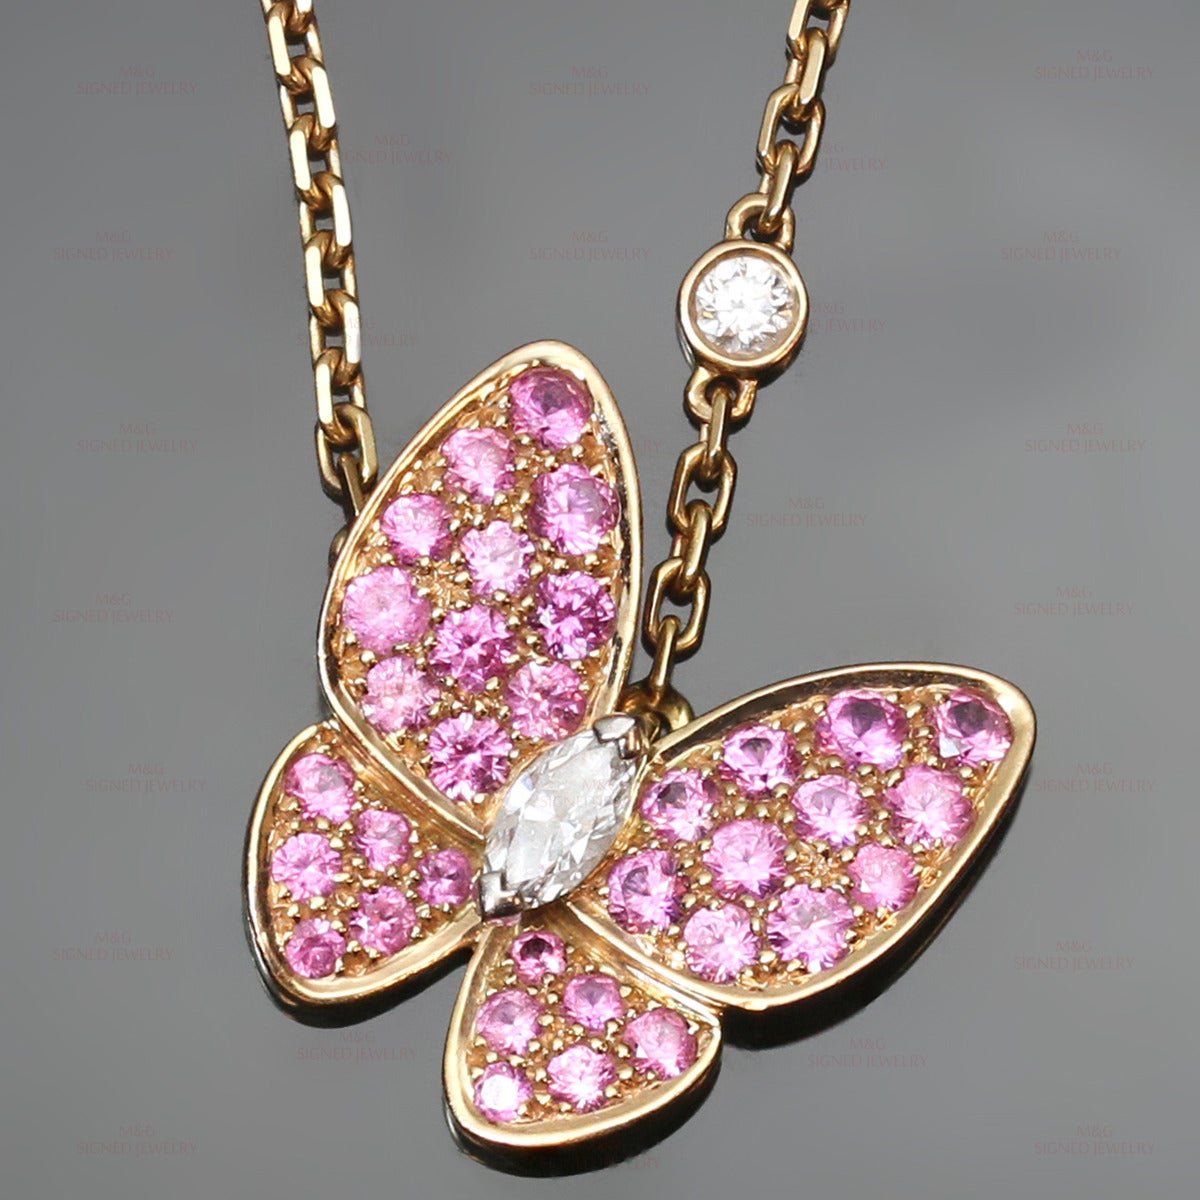 This fabulous Van Cleef & Arpels necklace is made in 18k yellow gold and features an elegant butterfly pendant set with marquise-cut D-F VVS1-VVS2 diamonds of an estimated 0.17 carats and faceted round pink sapphires of an estimated 1.45 carats.